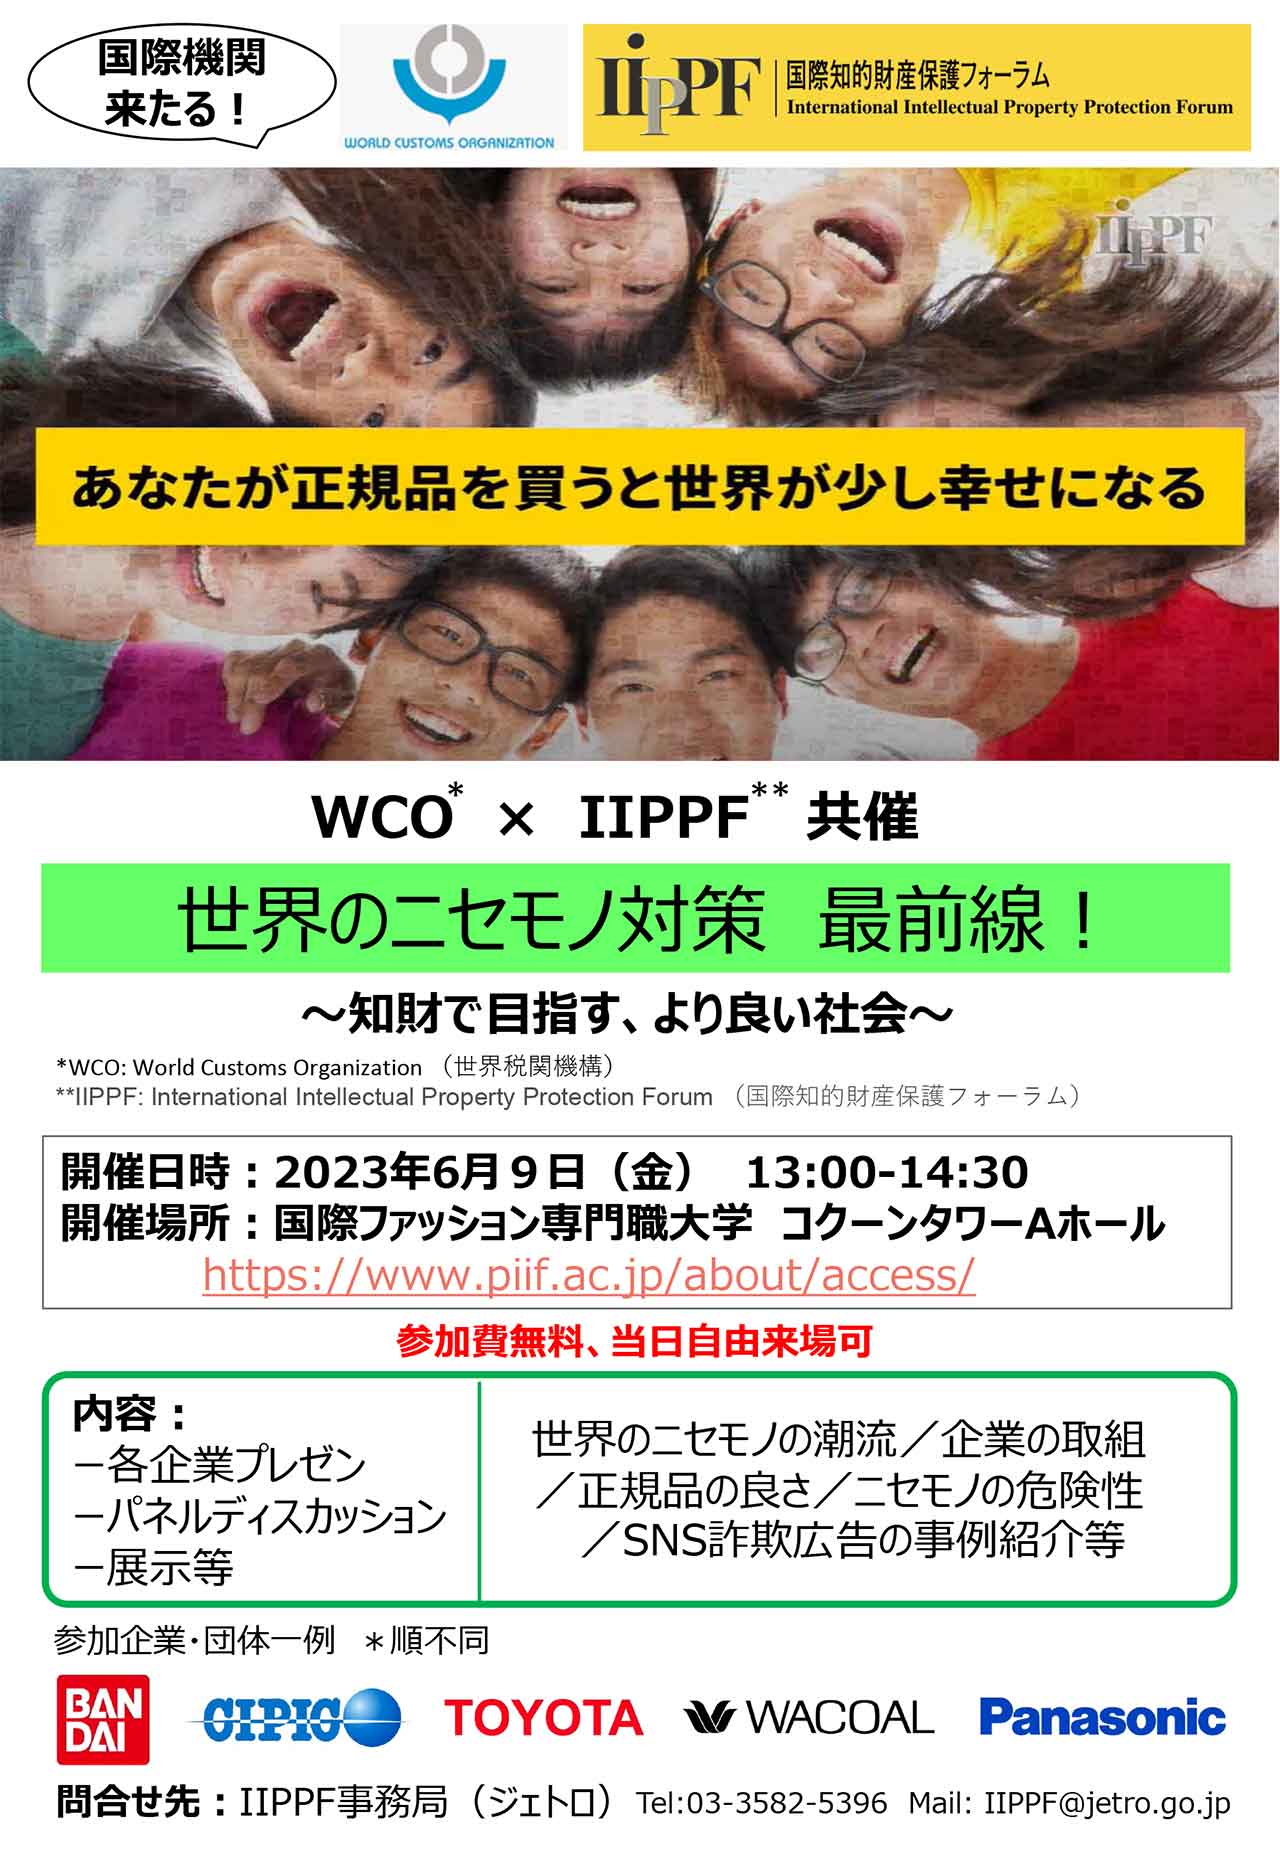 Event Poster; In Japanese WCO、IIPPF共催知財啓発イベント「世界のニセモノ対策 最前線！」